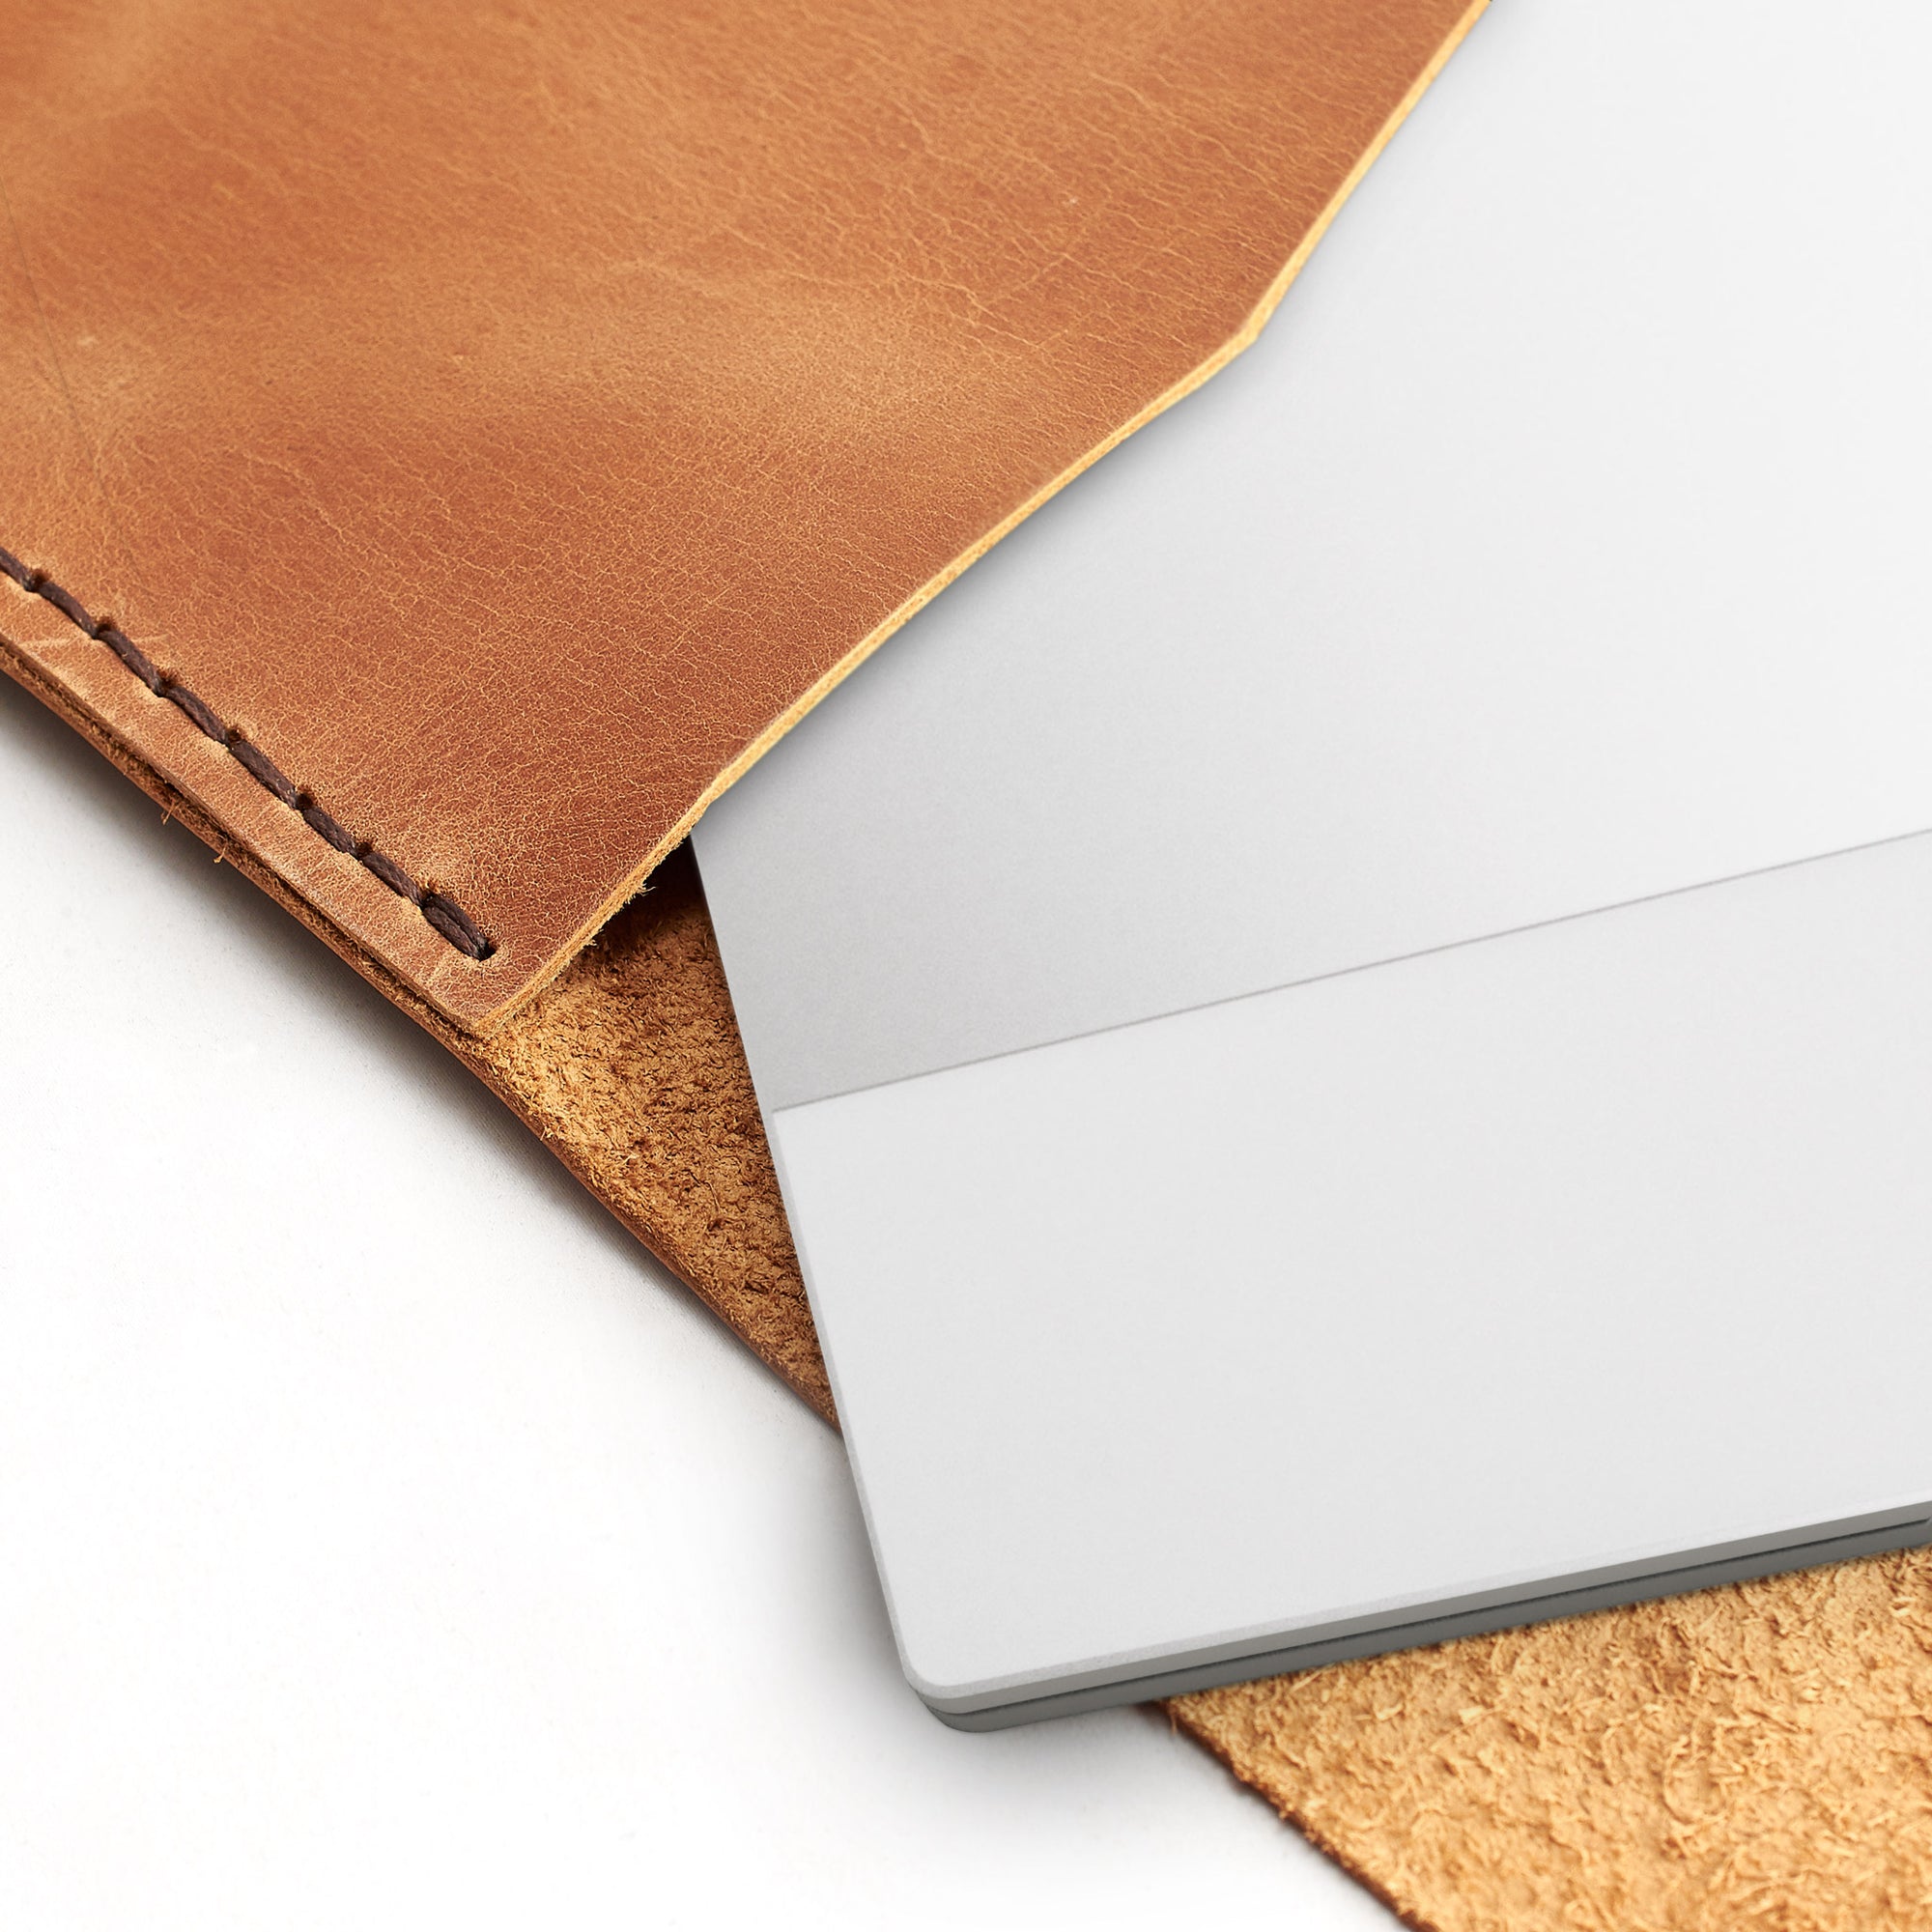 Style. Light Brown leather Google Pixelbook Sleeve Case